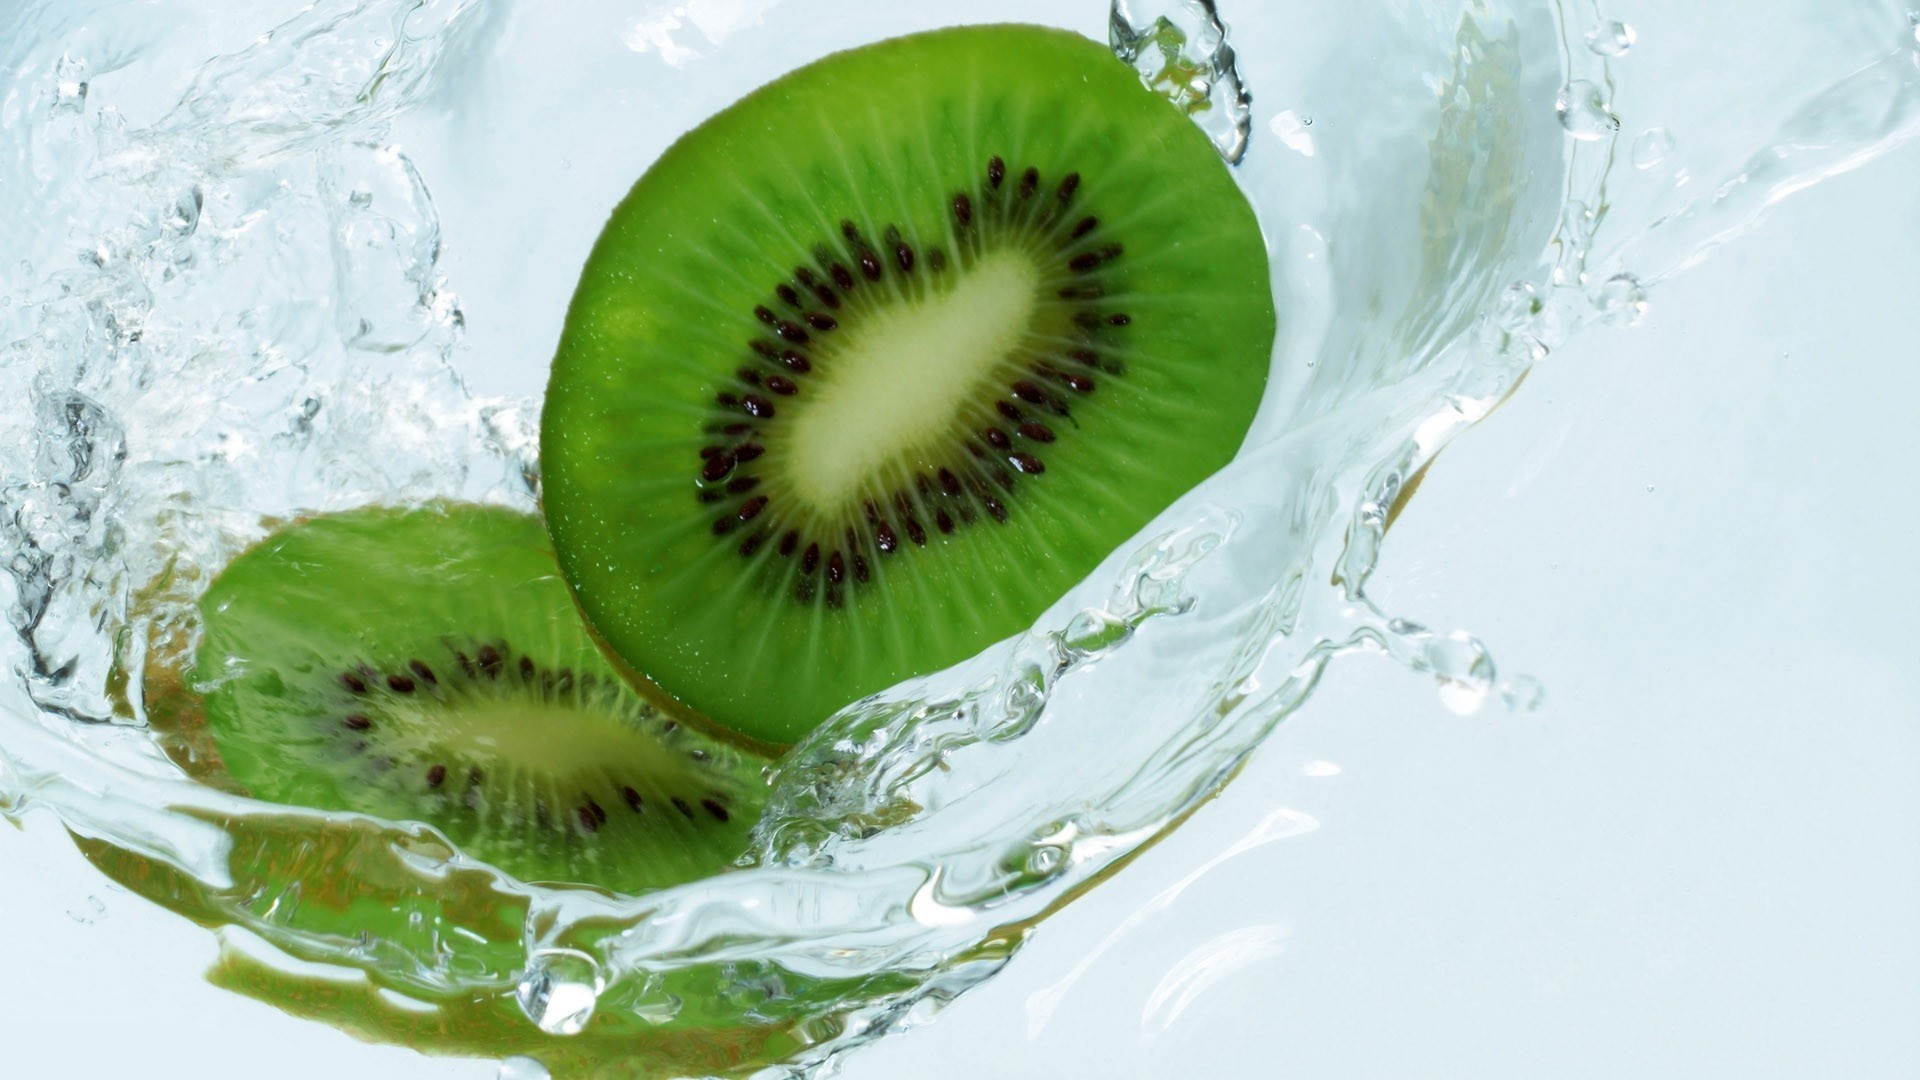 Fresh kiwi wallpaper, Wide collections, Desktop and mobile, Stunning images, 1920x1080 Full HD Desktop